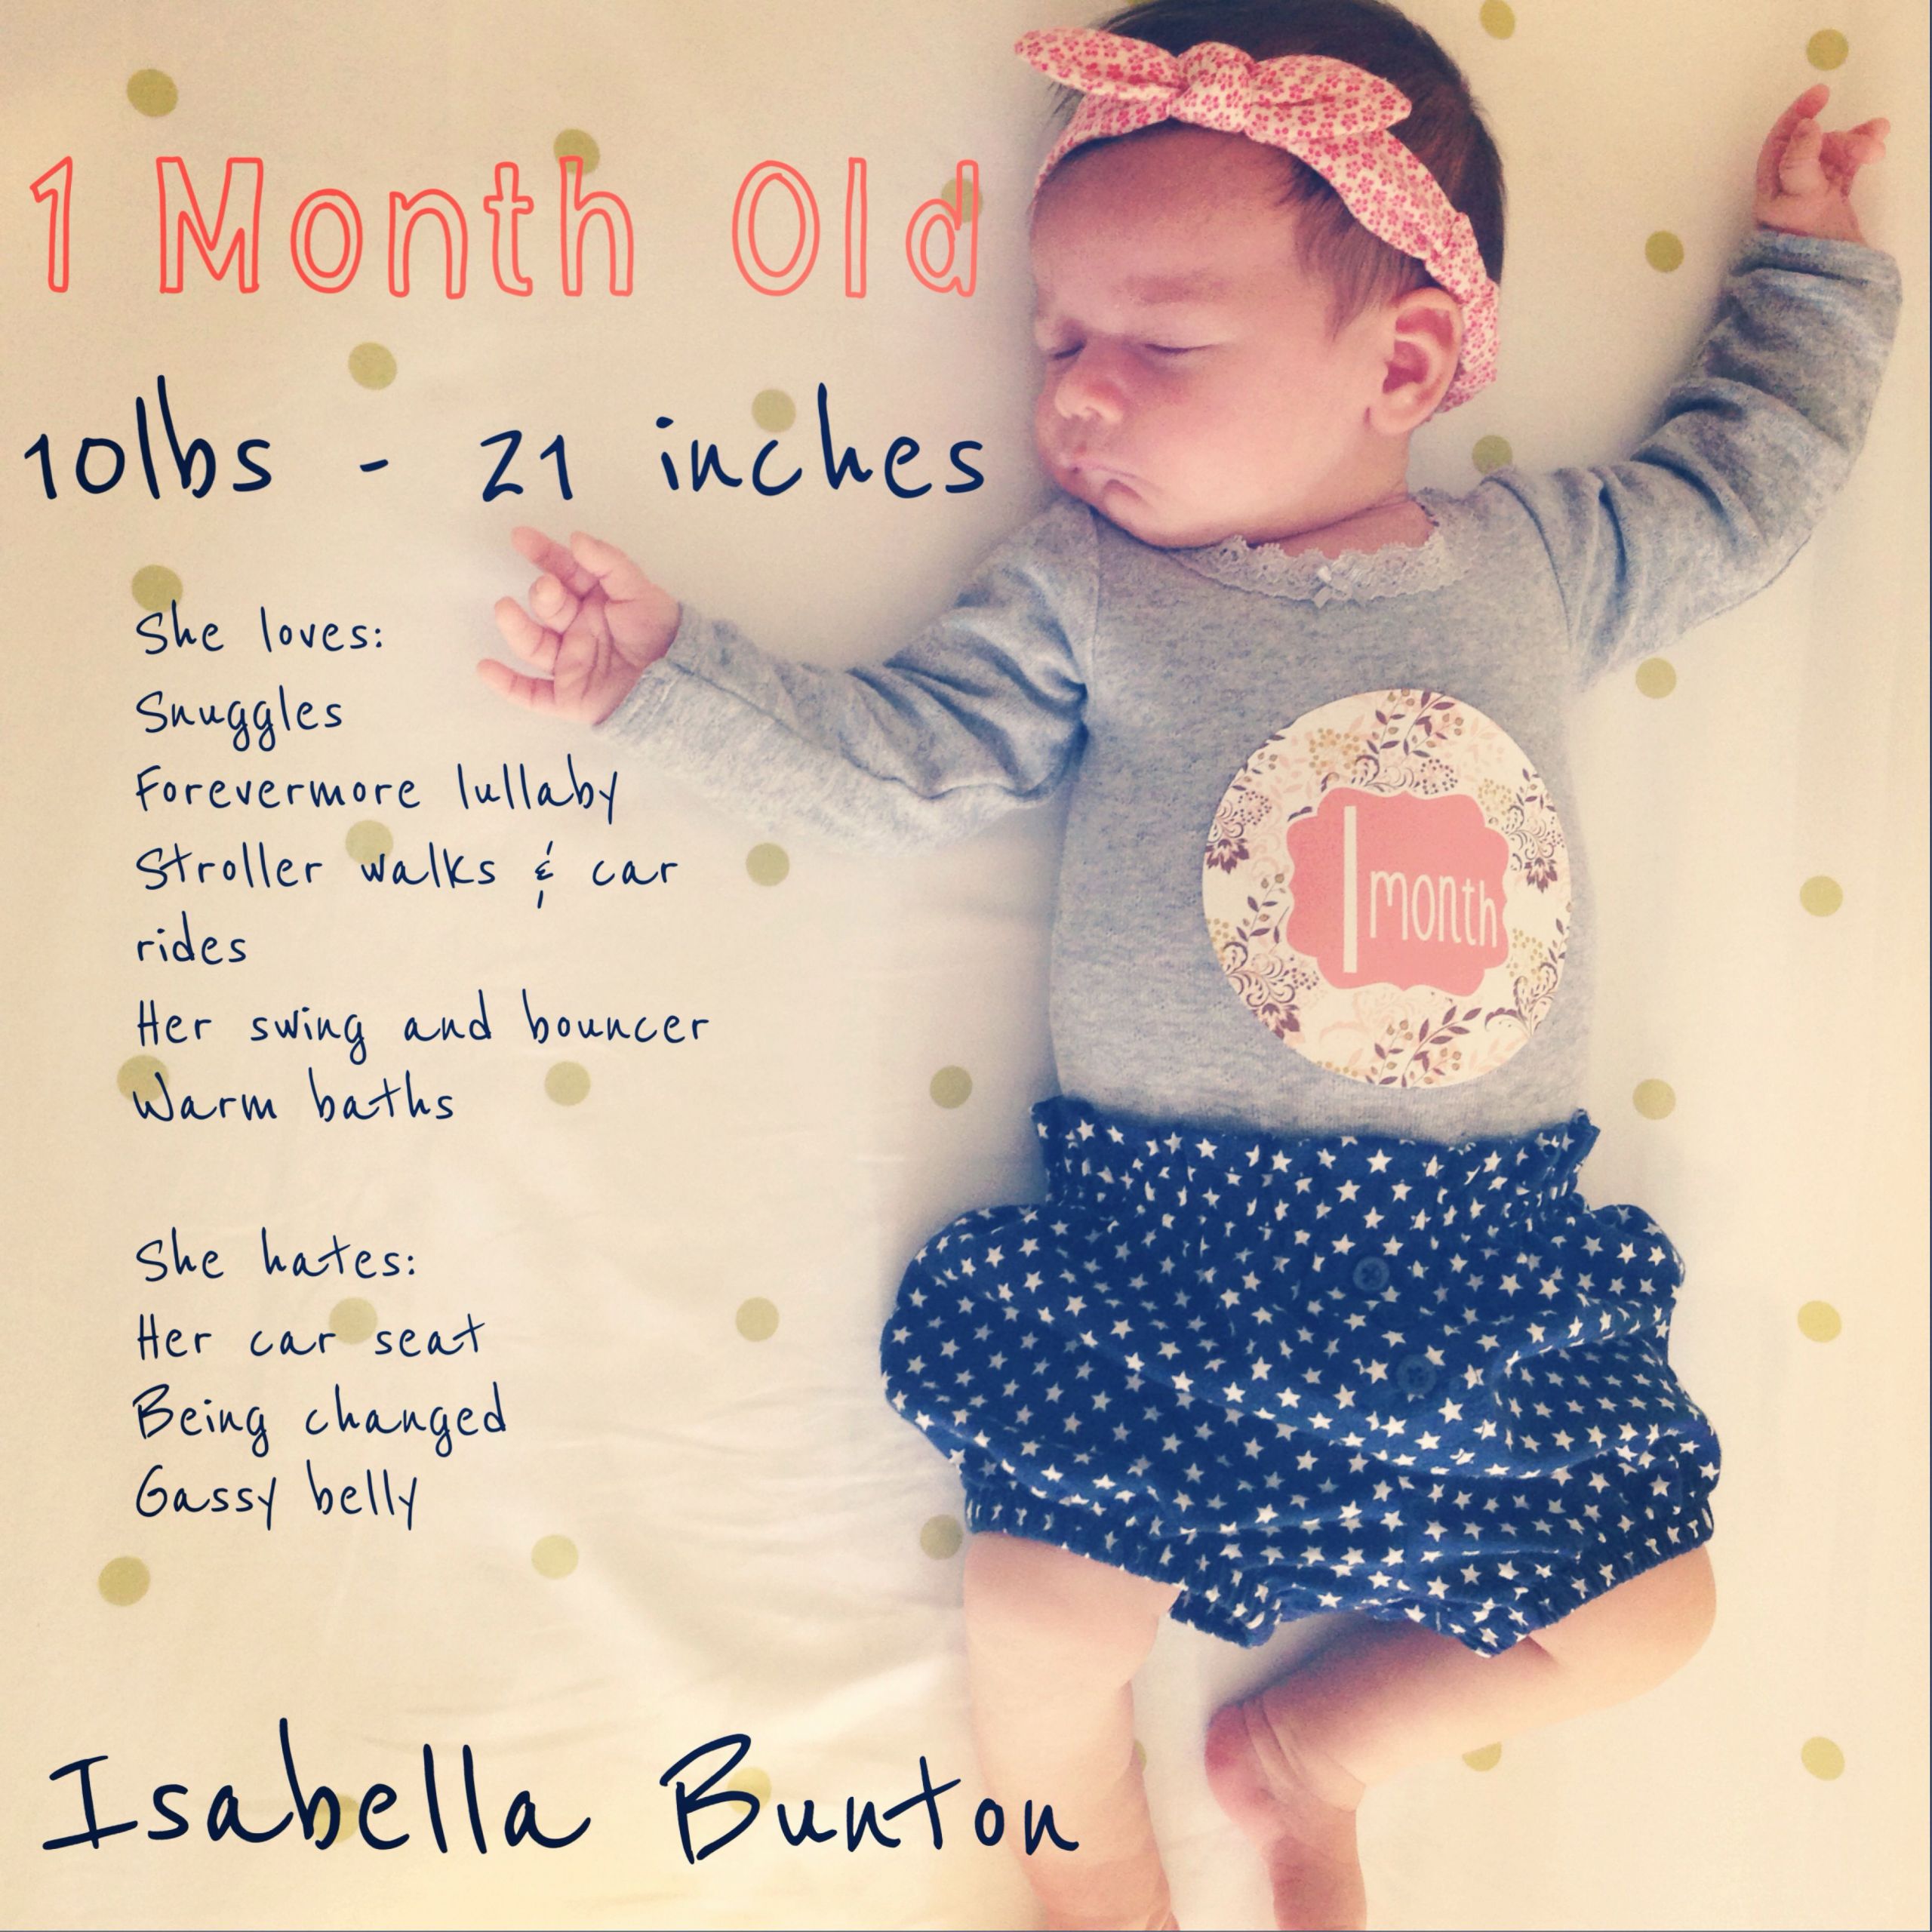 8 Month Old Baby Quotes
 1 month old picture